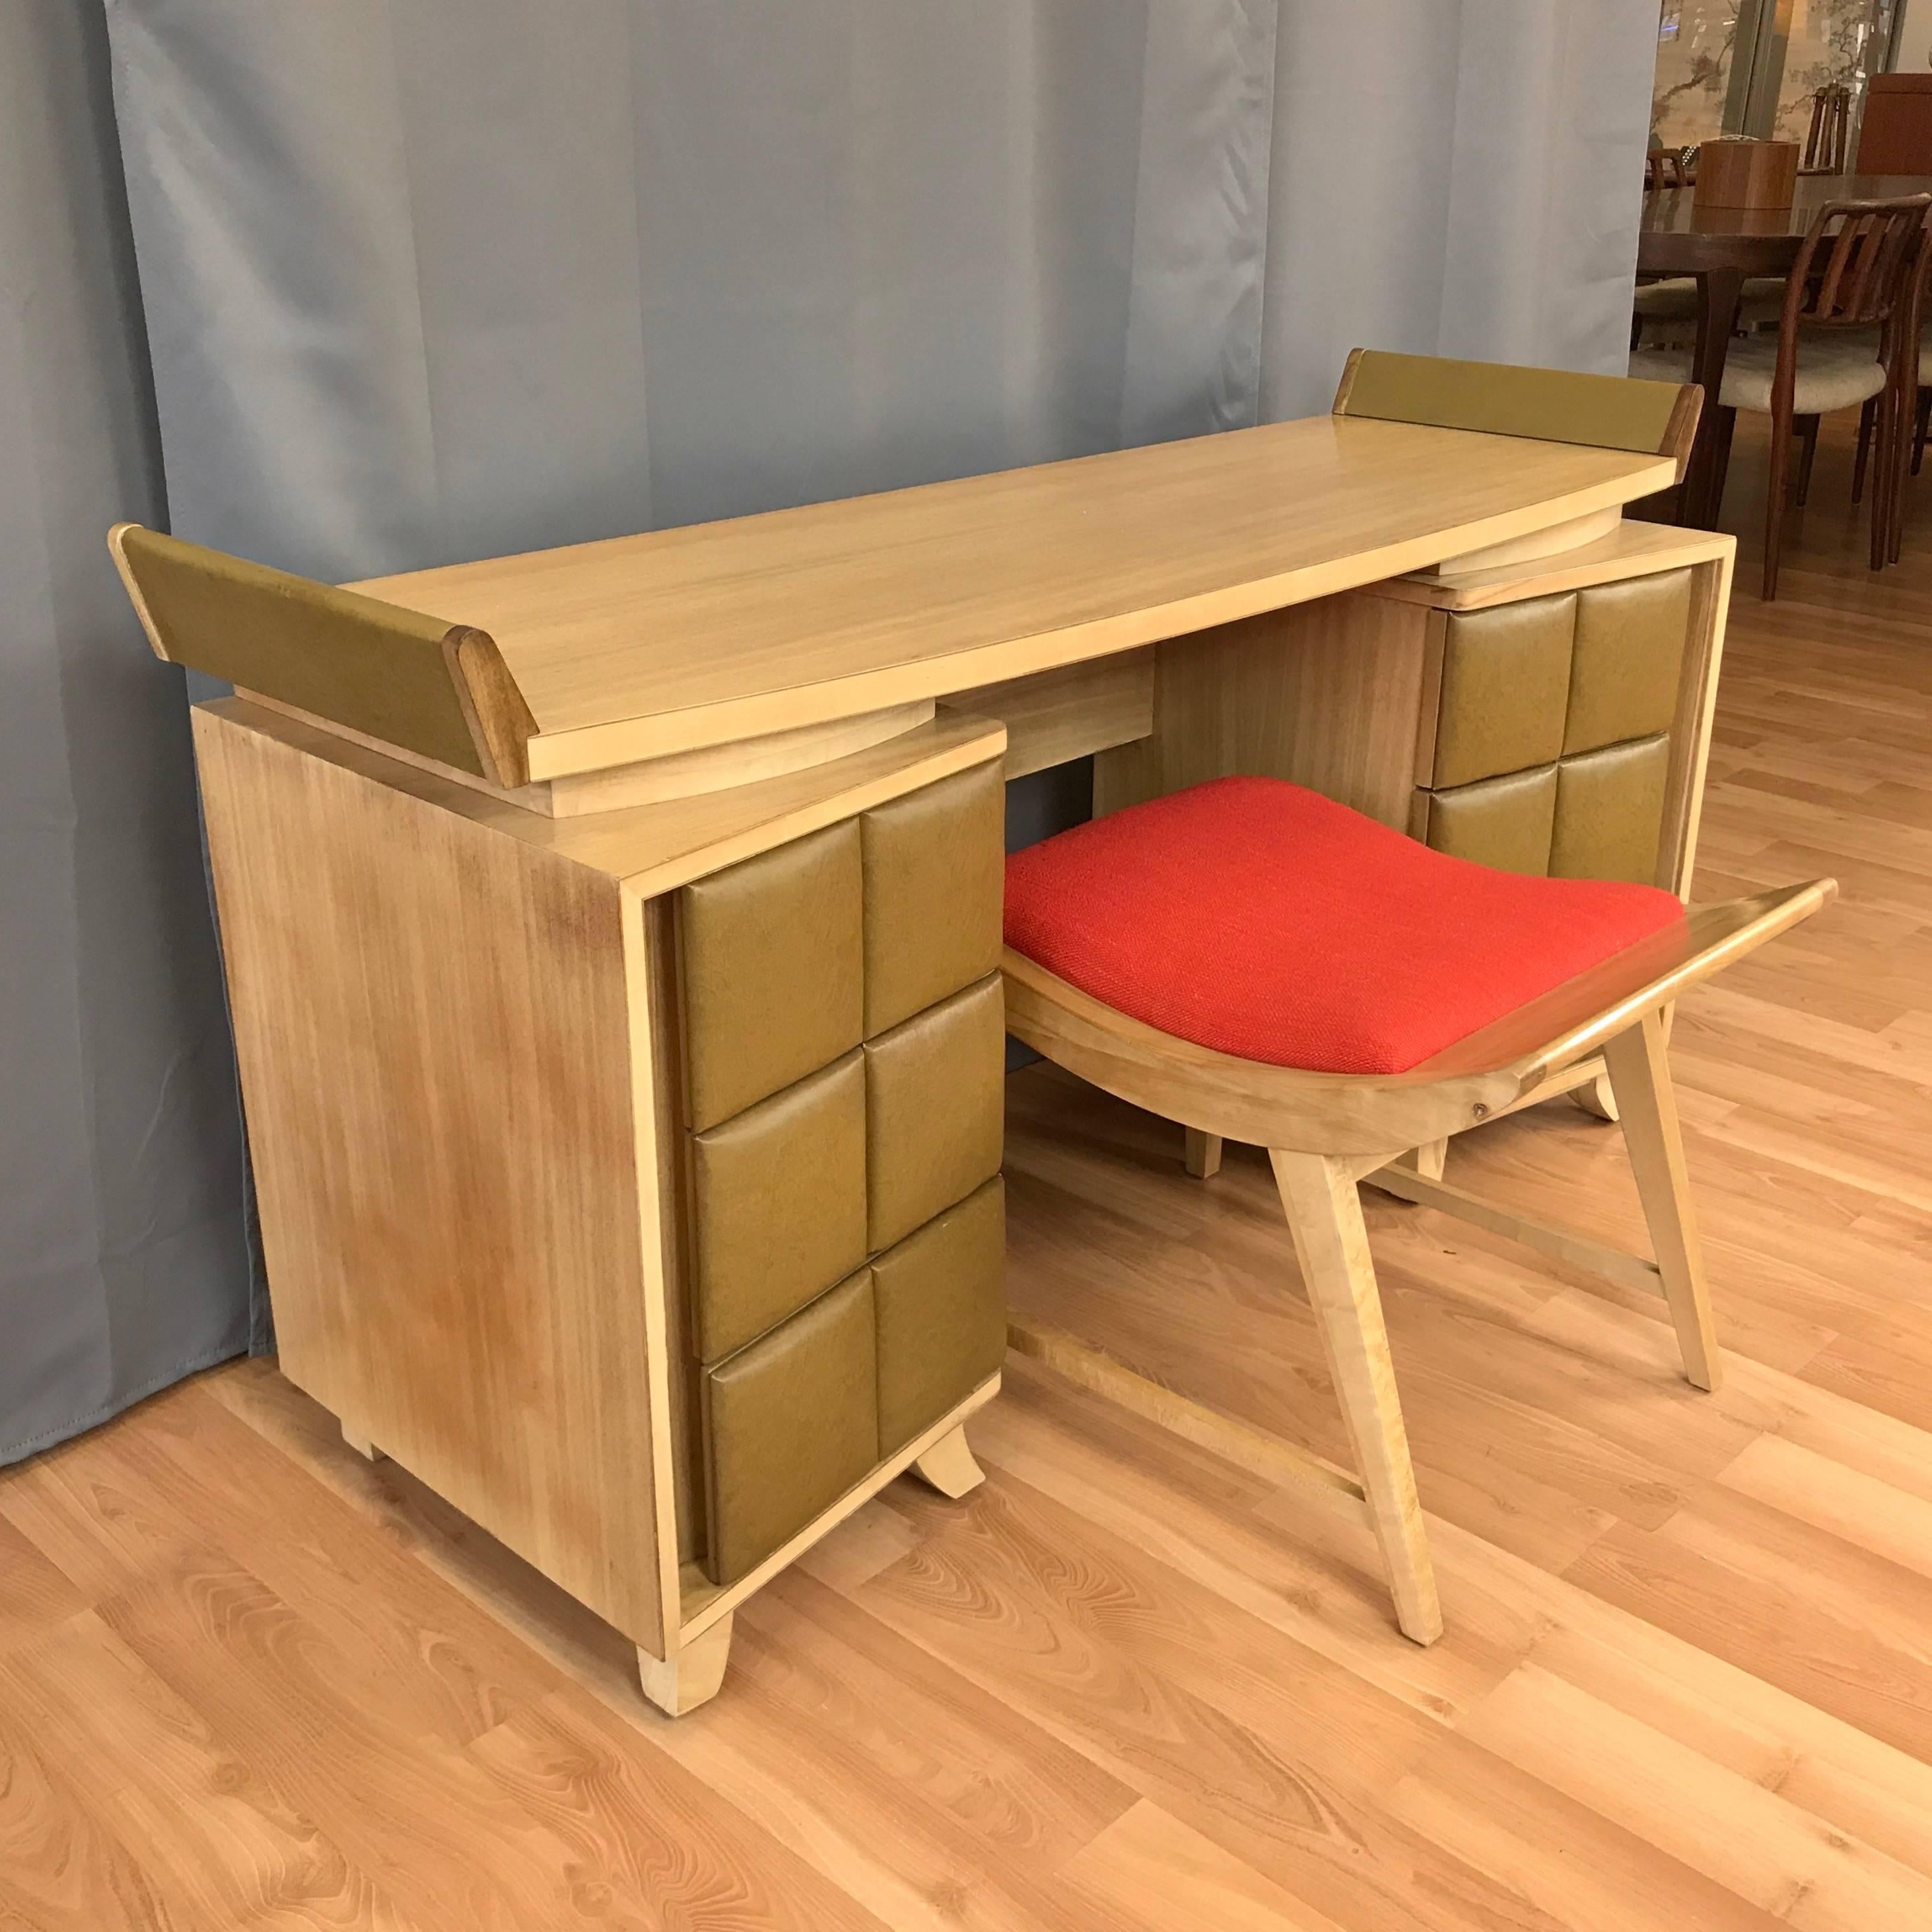 An early mid-century vanity and bench set by master of American modernism Gilbert Rohde for Herman Miller.

Vanity or writer’s desk in birch and quartered birch veneer. Top has slightly curved front edge and floats above a pair of angled cabinets,